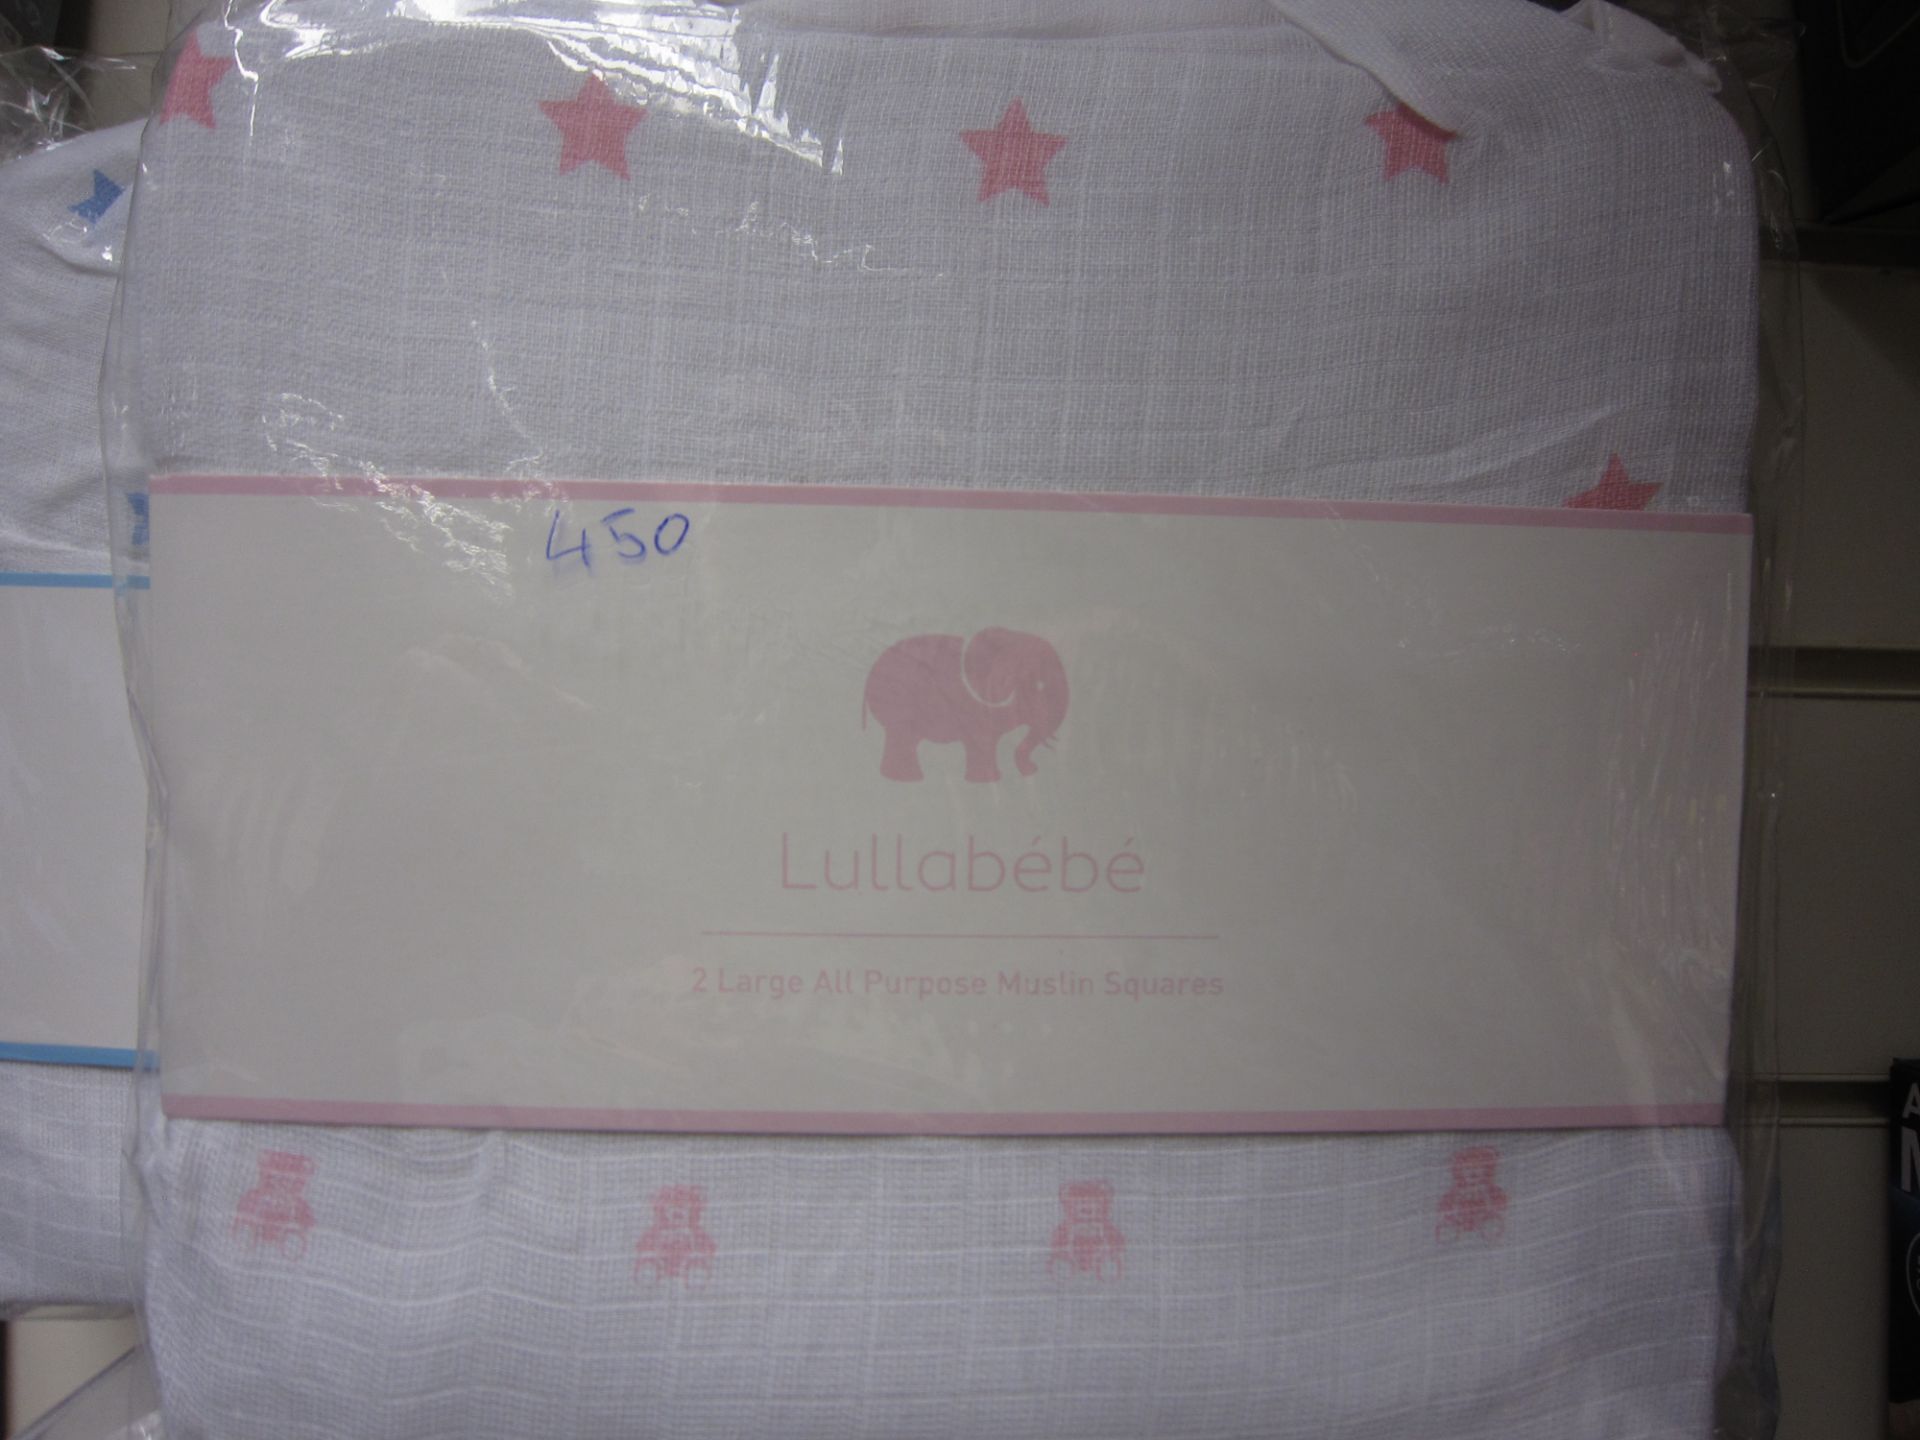 10 Pcs Assorted Blue and Pink Brand New Large Size Baby Swaddle Blankets - Brand Is Bebe - Large